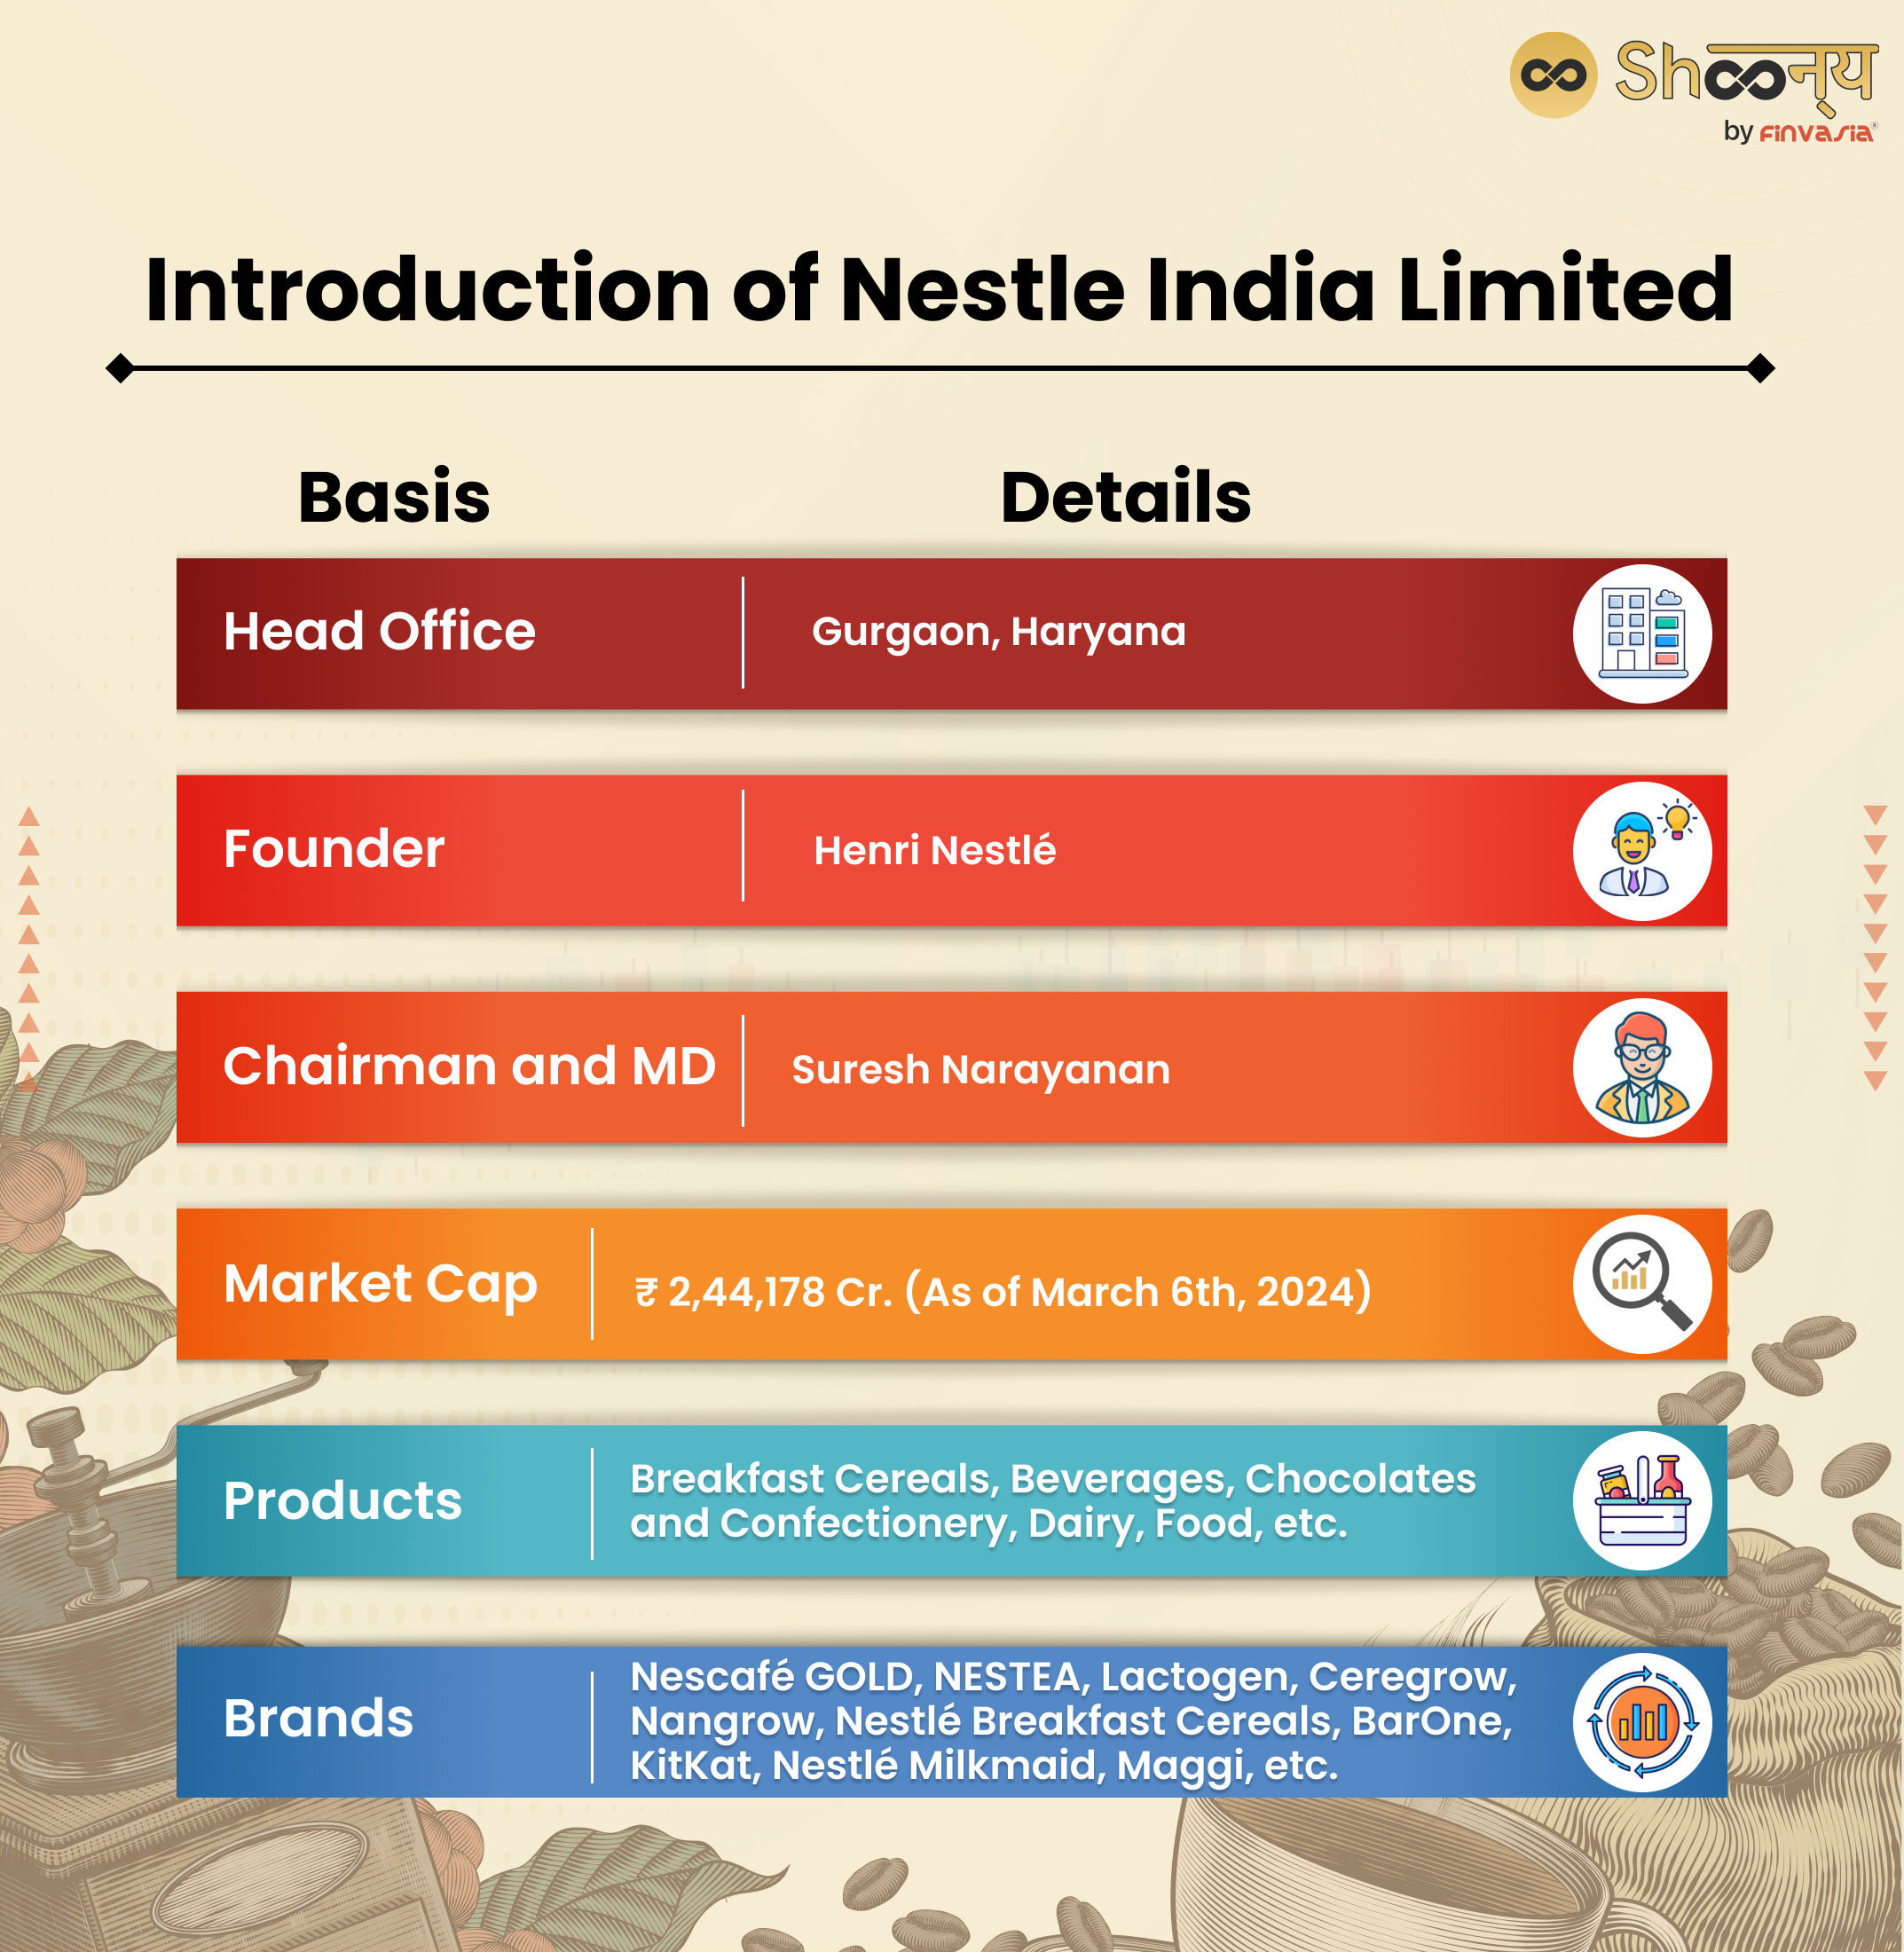 Introduction of Nestle India Limited